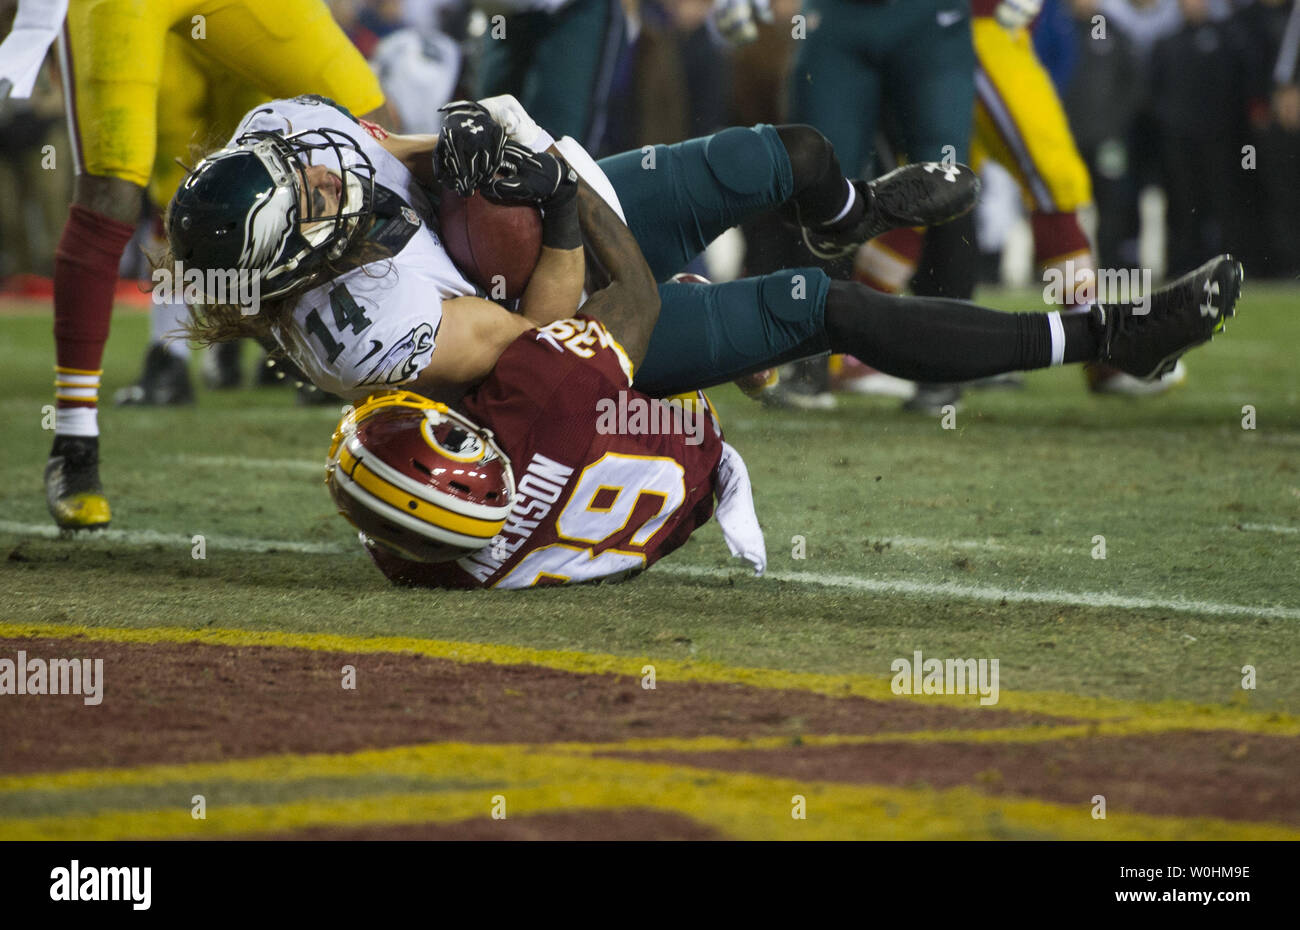 Philadelphia Eagles wide receiver Riley Cooper brings in a 3-yard touchdown against Washington Redskins cornerback David Amerson in the second quarter at FedEx field in Landover, Maryland on December 20, 2014.  UPI/Kevin Dietsch Stock Photo